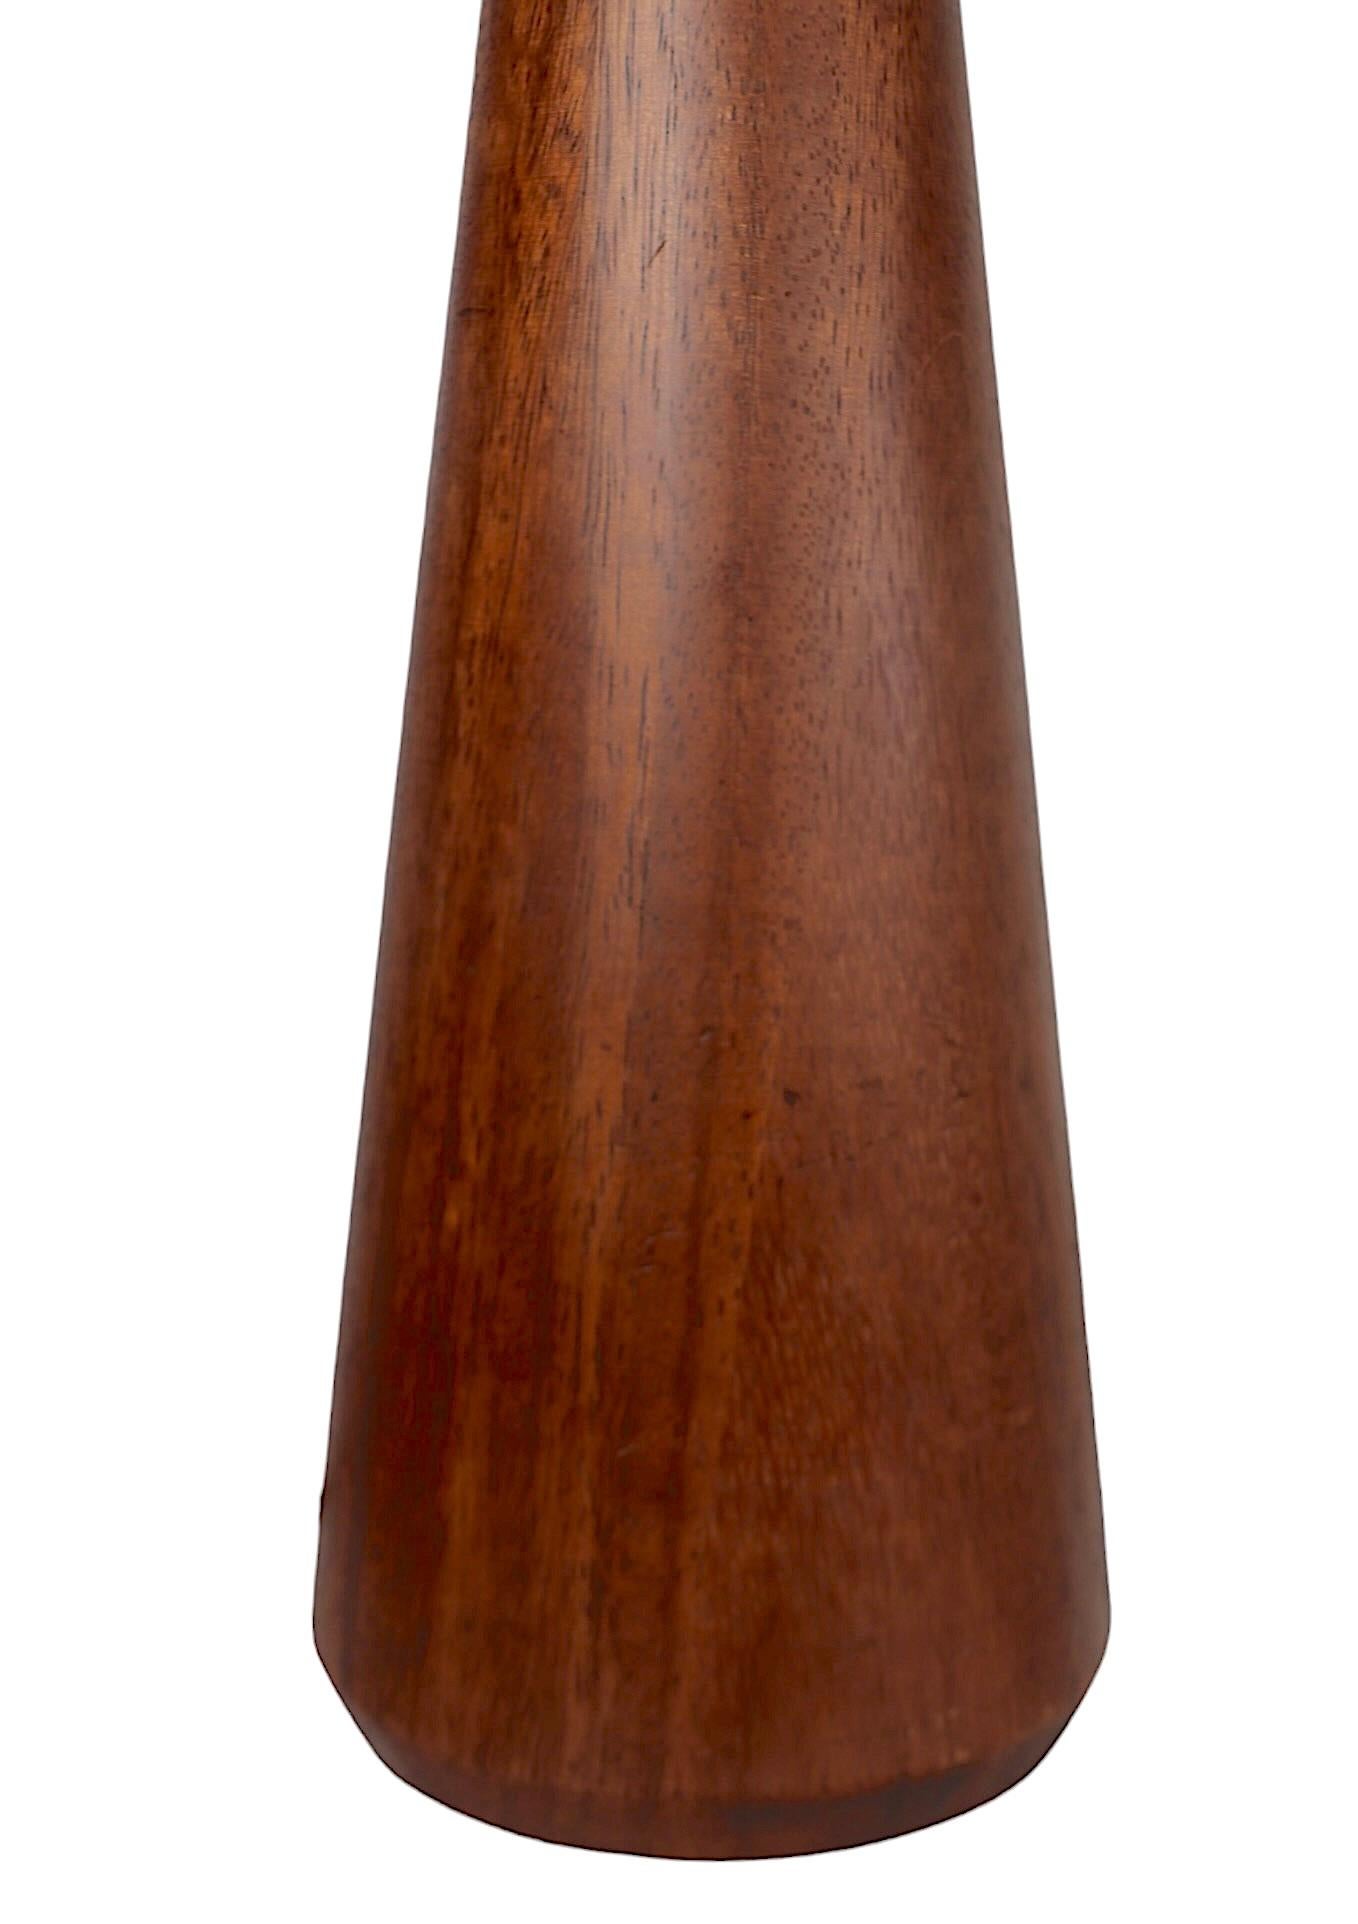  Danish Style Mid Century Wood Table Lamp c 1950/60's For Sale 2